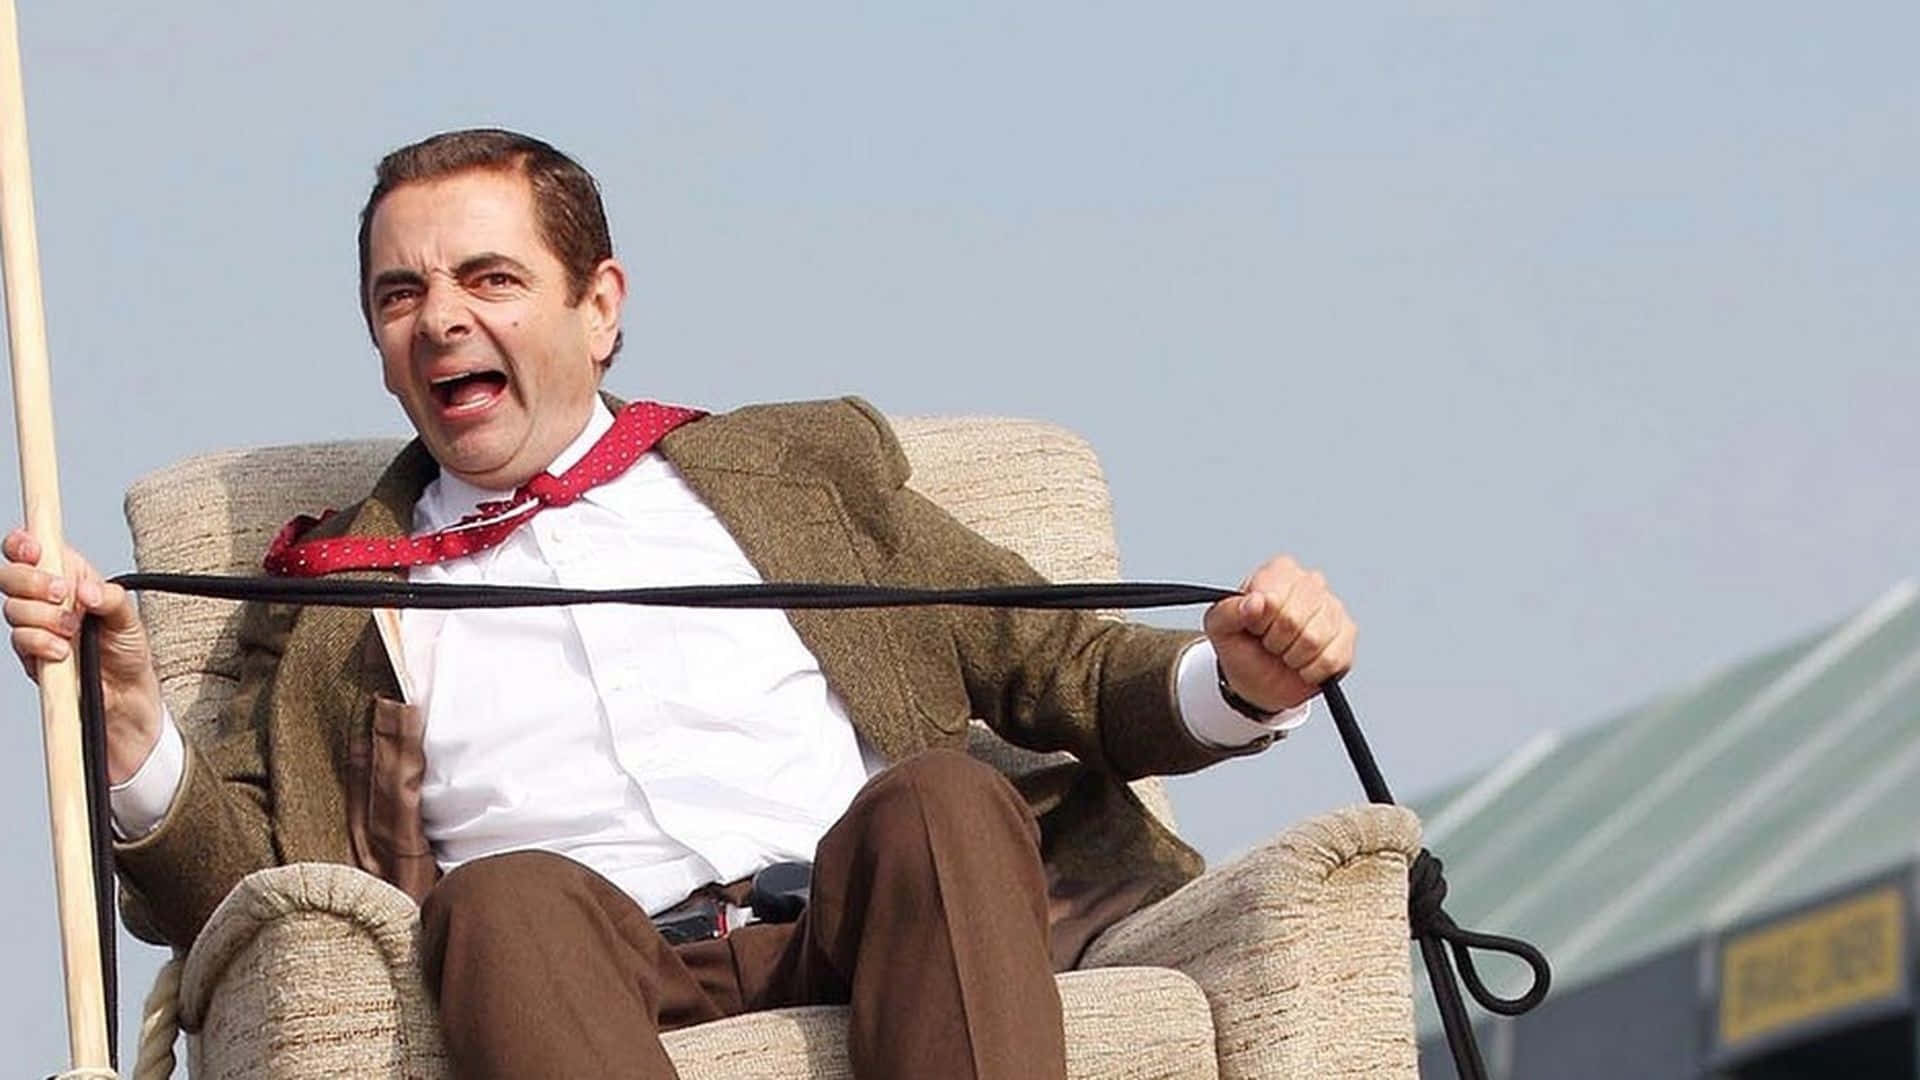 Caption: Mr. Bean's Hilarious High Jinks Caught in the Act